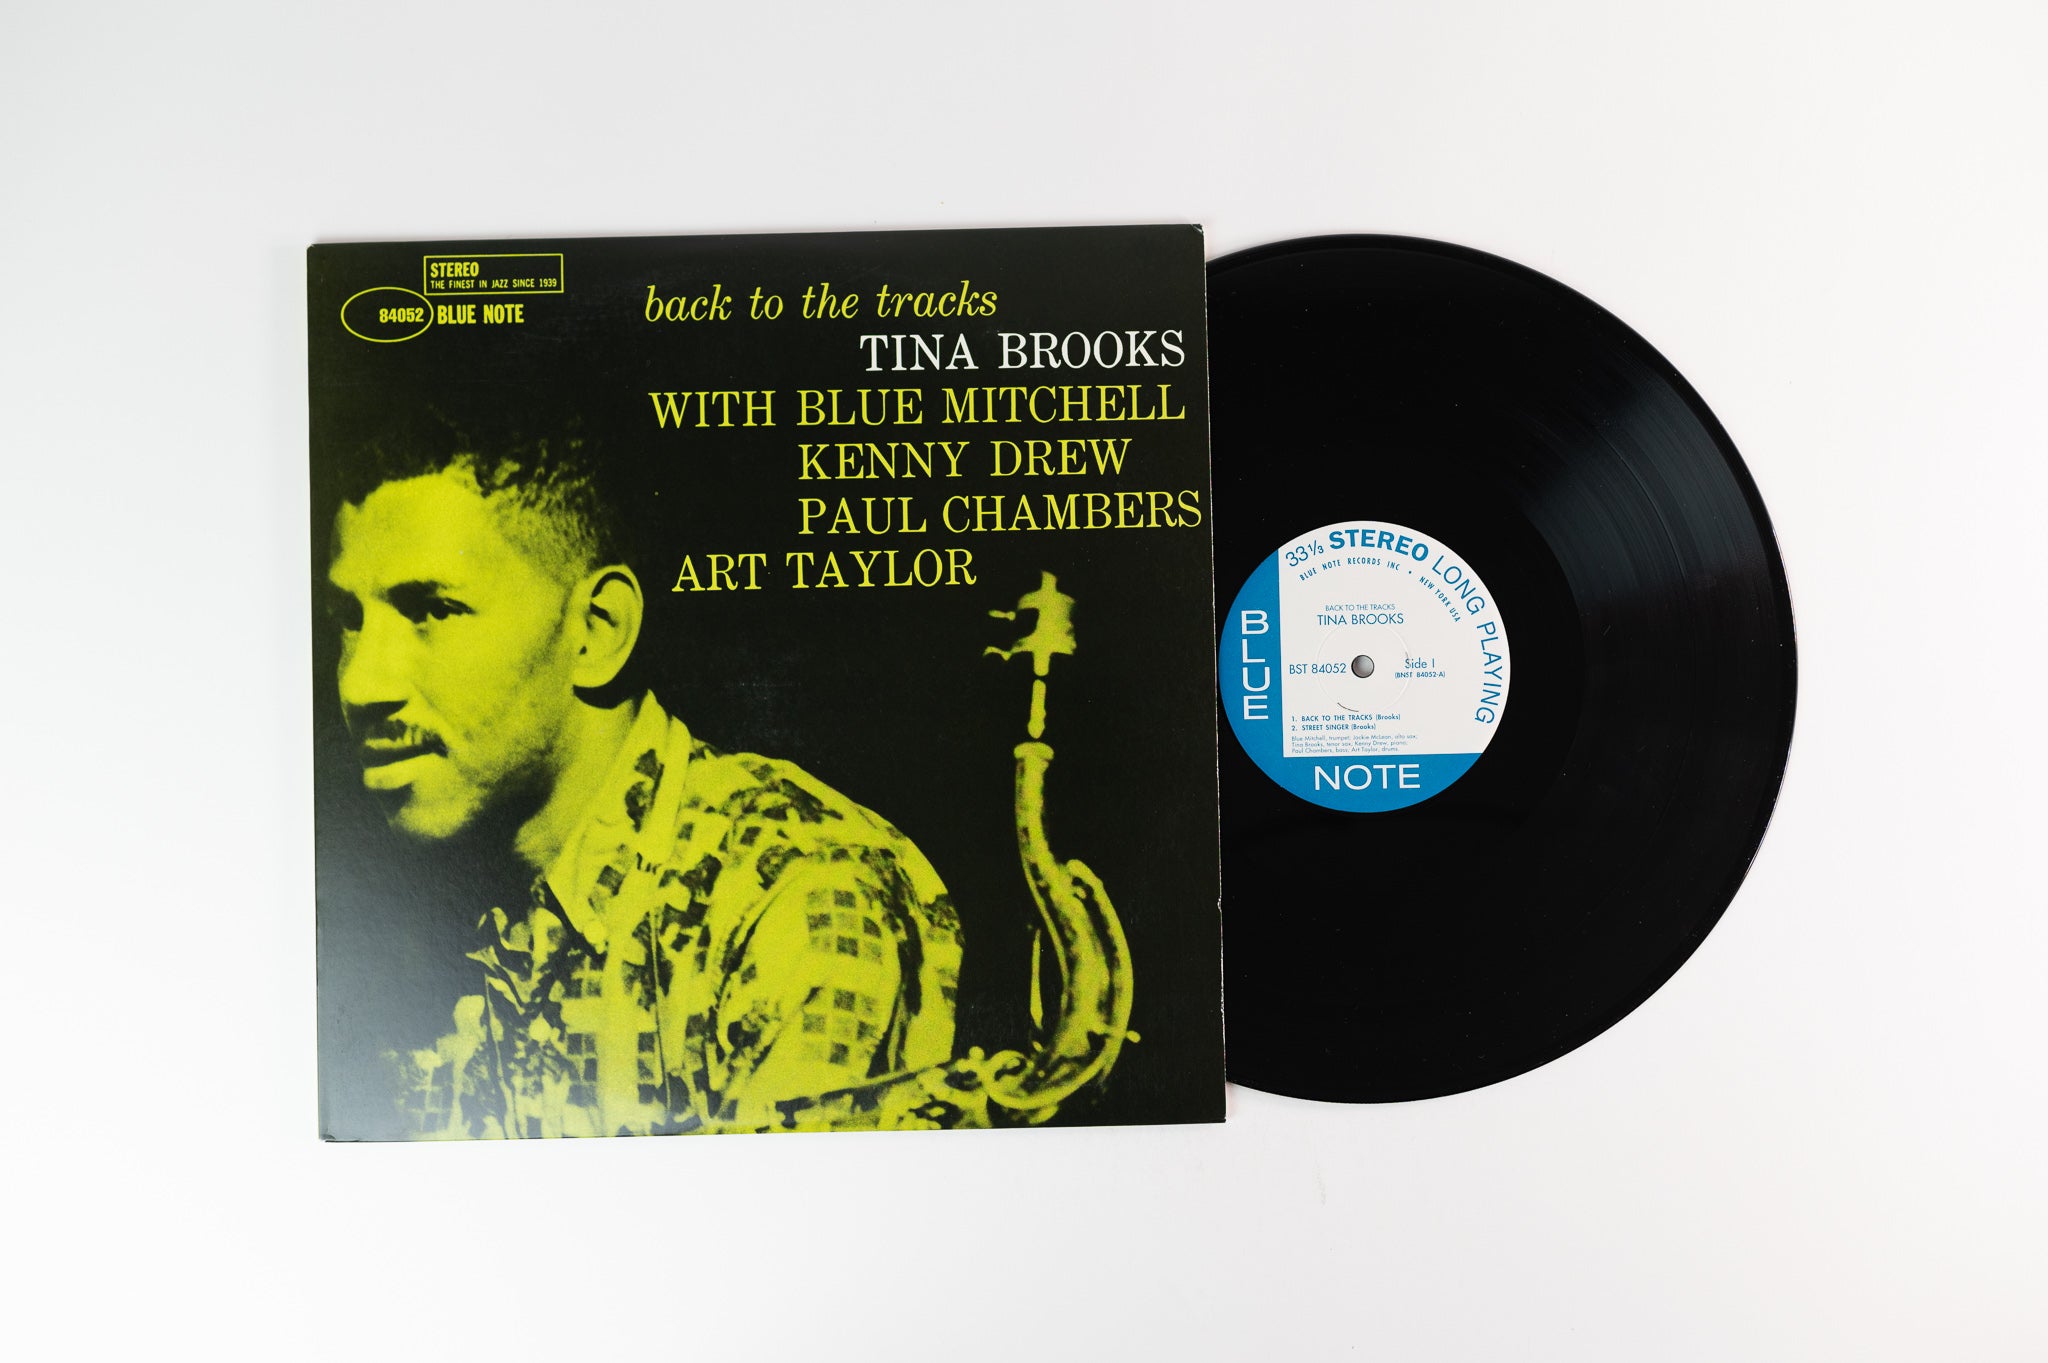 Tina Brooks - Back To The Tracks on Blue Note Classic Records Reissue